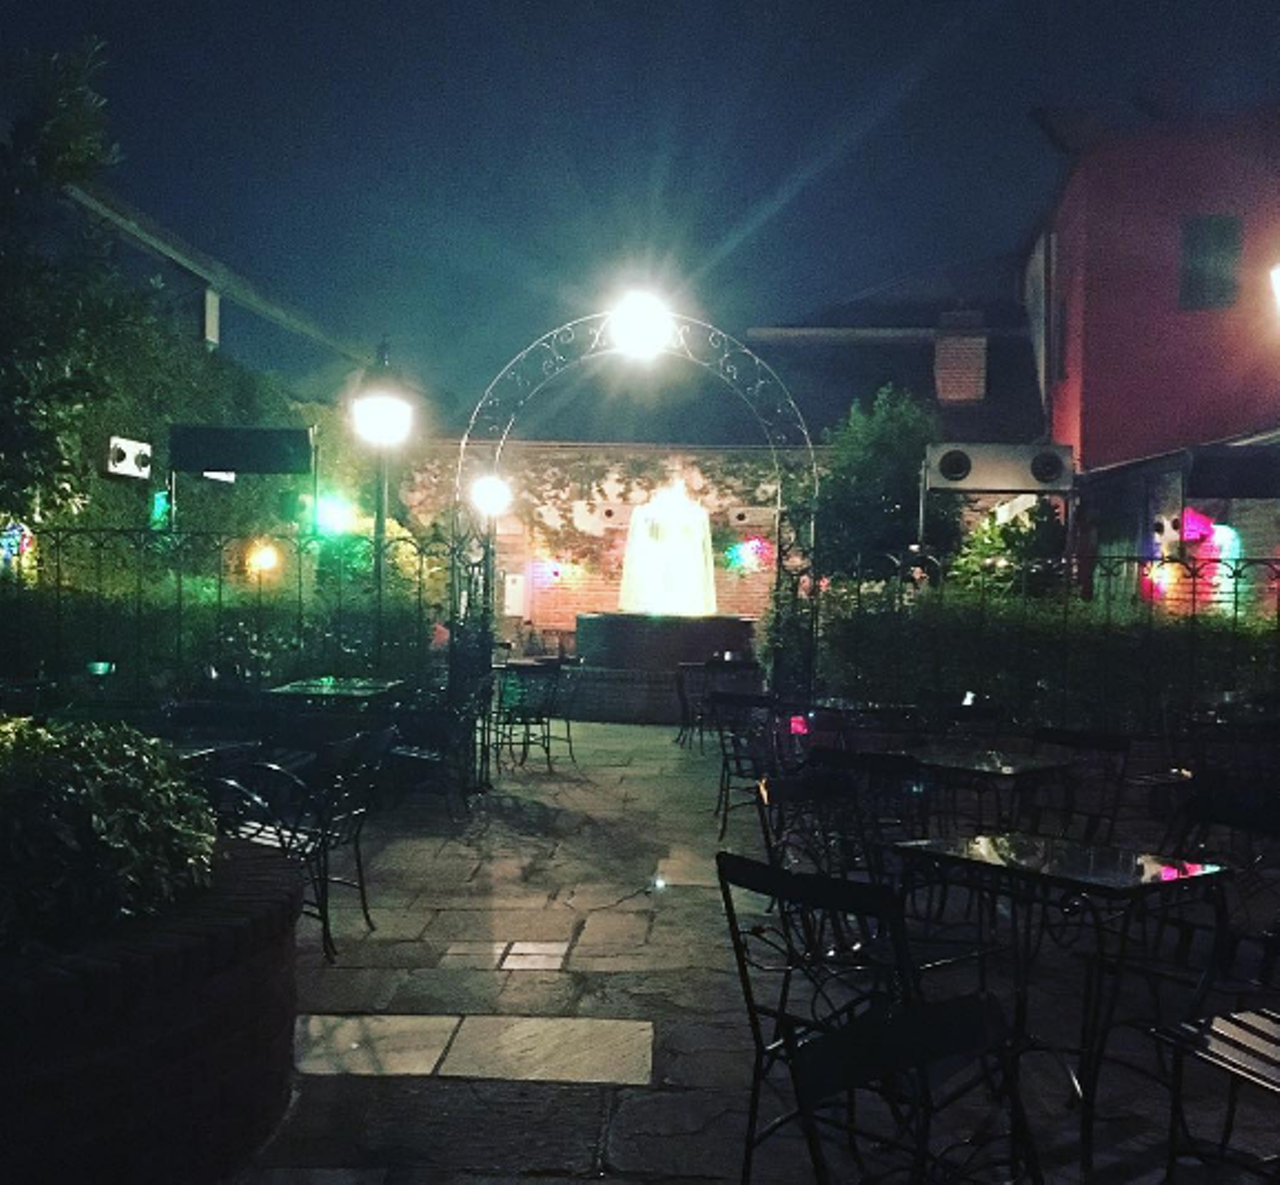 Pat O&#146;Briens
6000 Universal Blvd. ; 407-224-3663 
This bar is a replica of the one over in N&#146;awlins. There&#146;s all the cajun food your soul could ever need and a flaming fountain out by the patio area perfect for relaxation after a day in the parks. 
Photo via Morgan_ashley210/Instagram